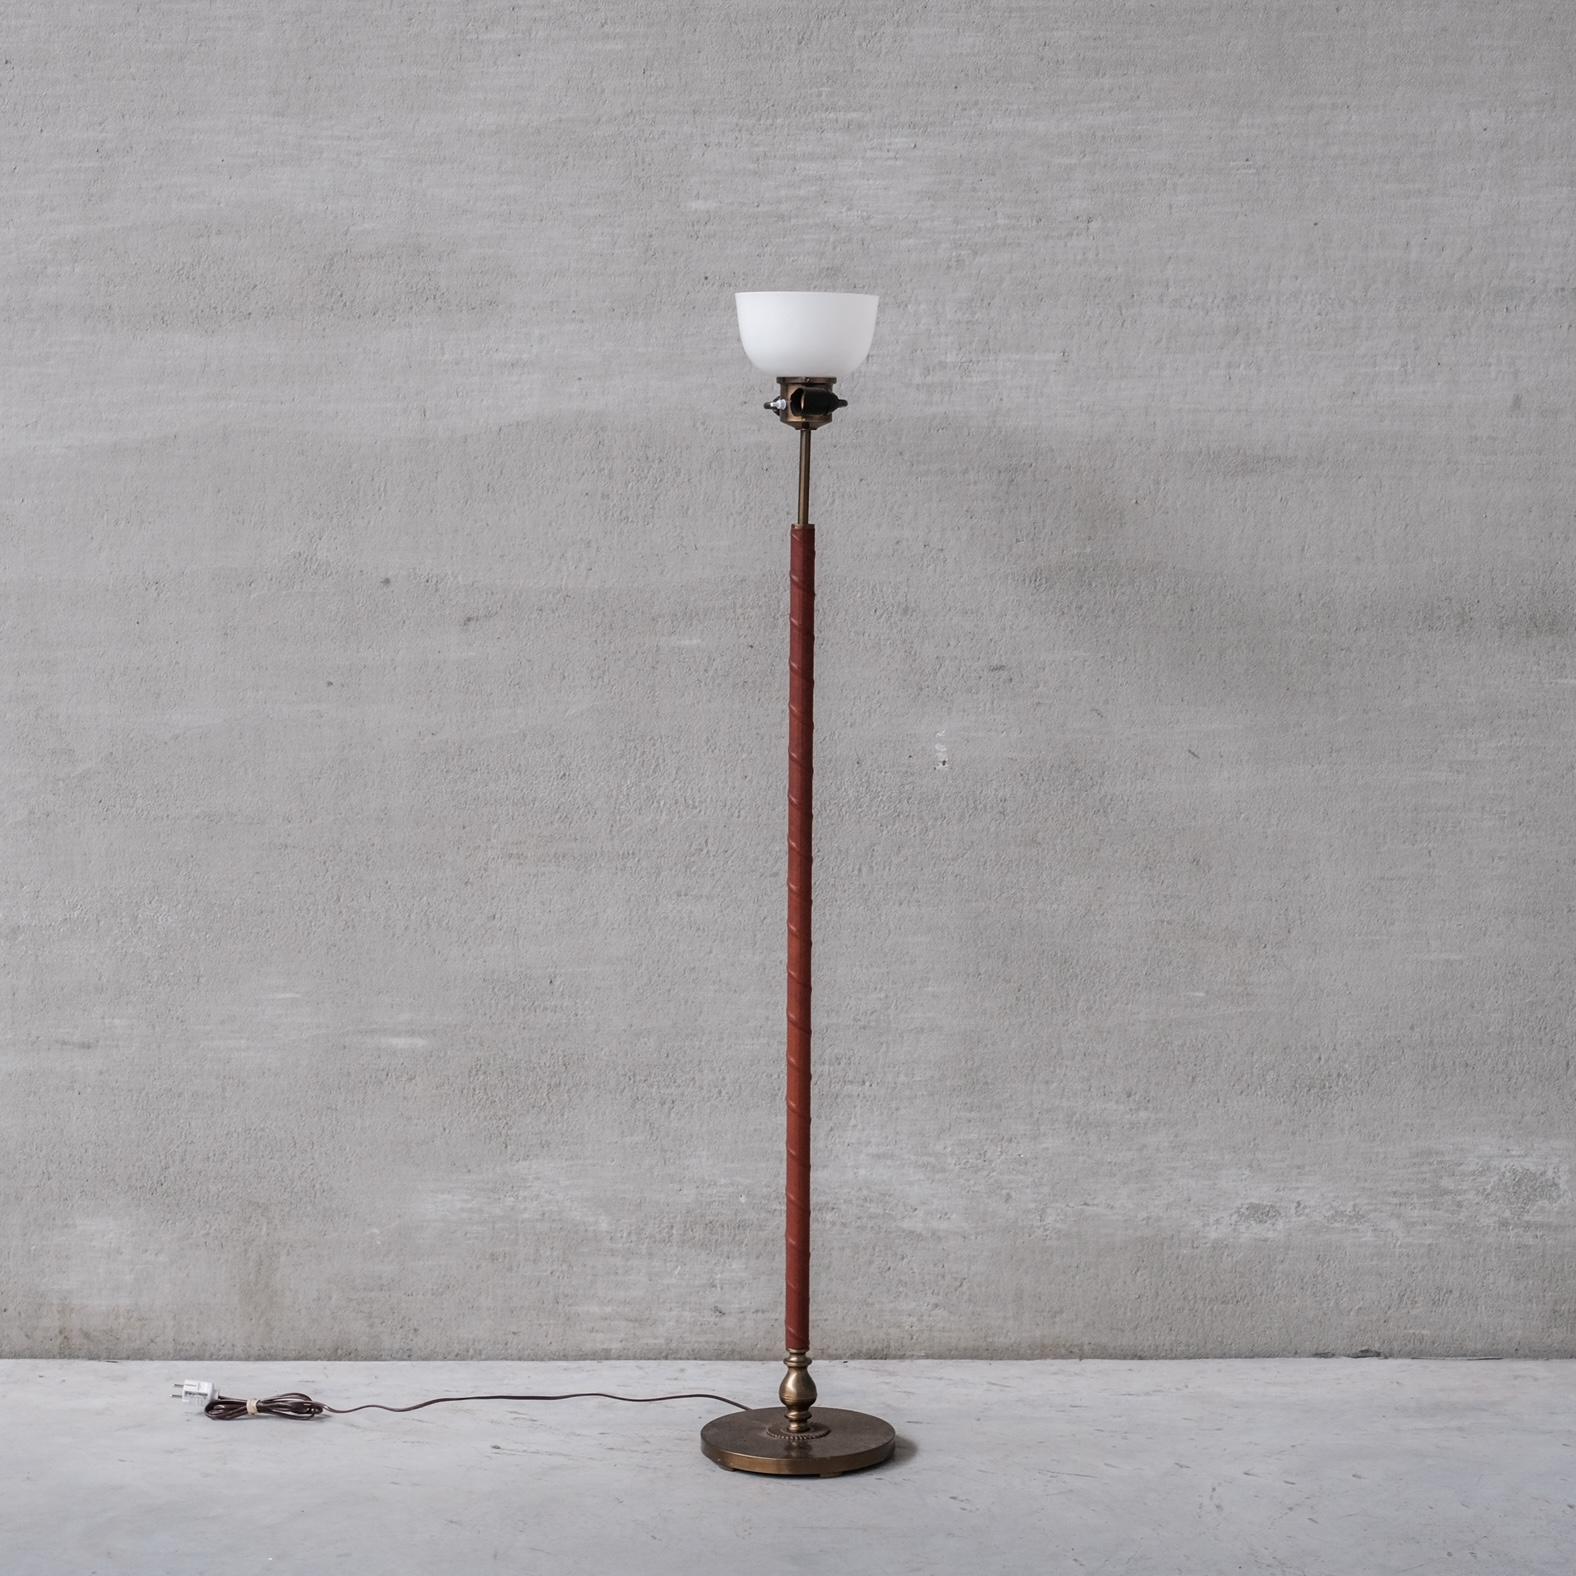 A floor lamp by Einar Bäckström. 

Sweden, circa 1950s. 

Brushed brass and leather. 

Original glass booster shade retained which would be the stability for a custom shade. We have a local shade maker we can recommend for a quote.